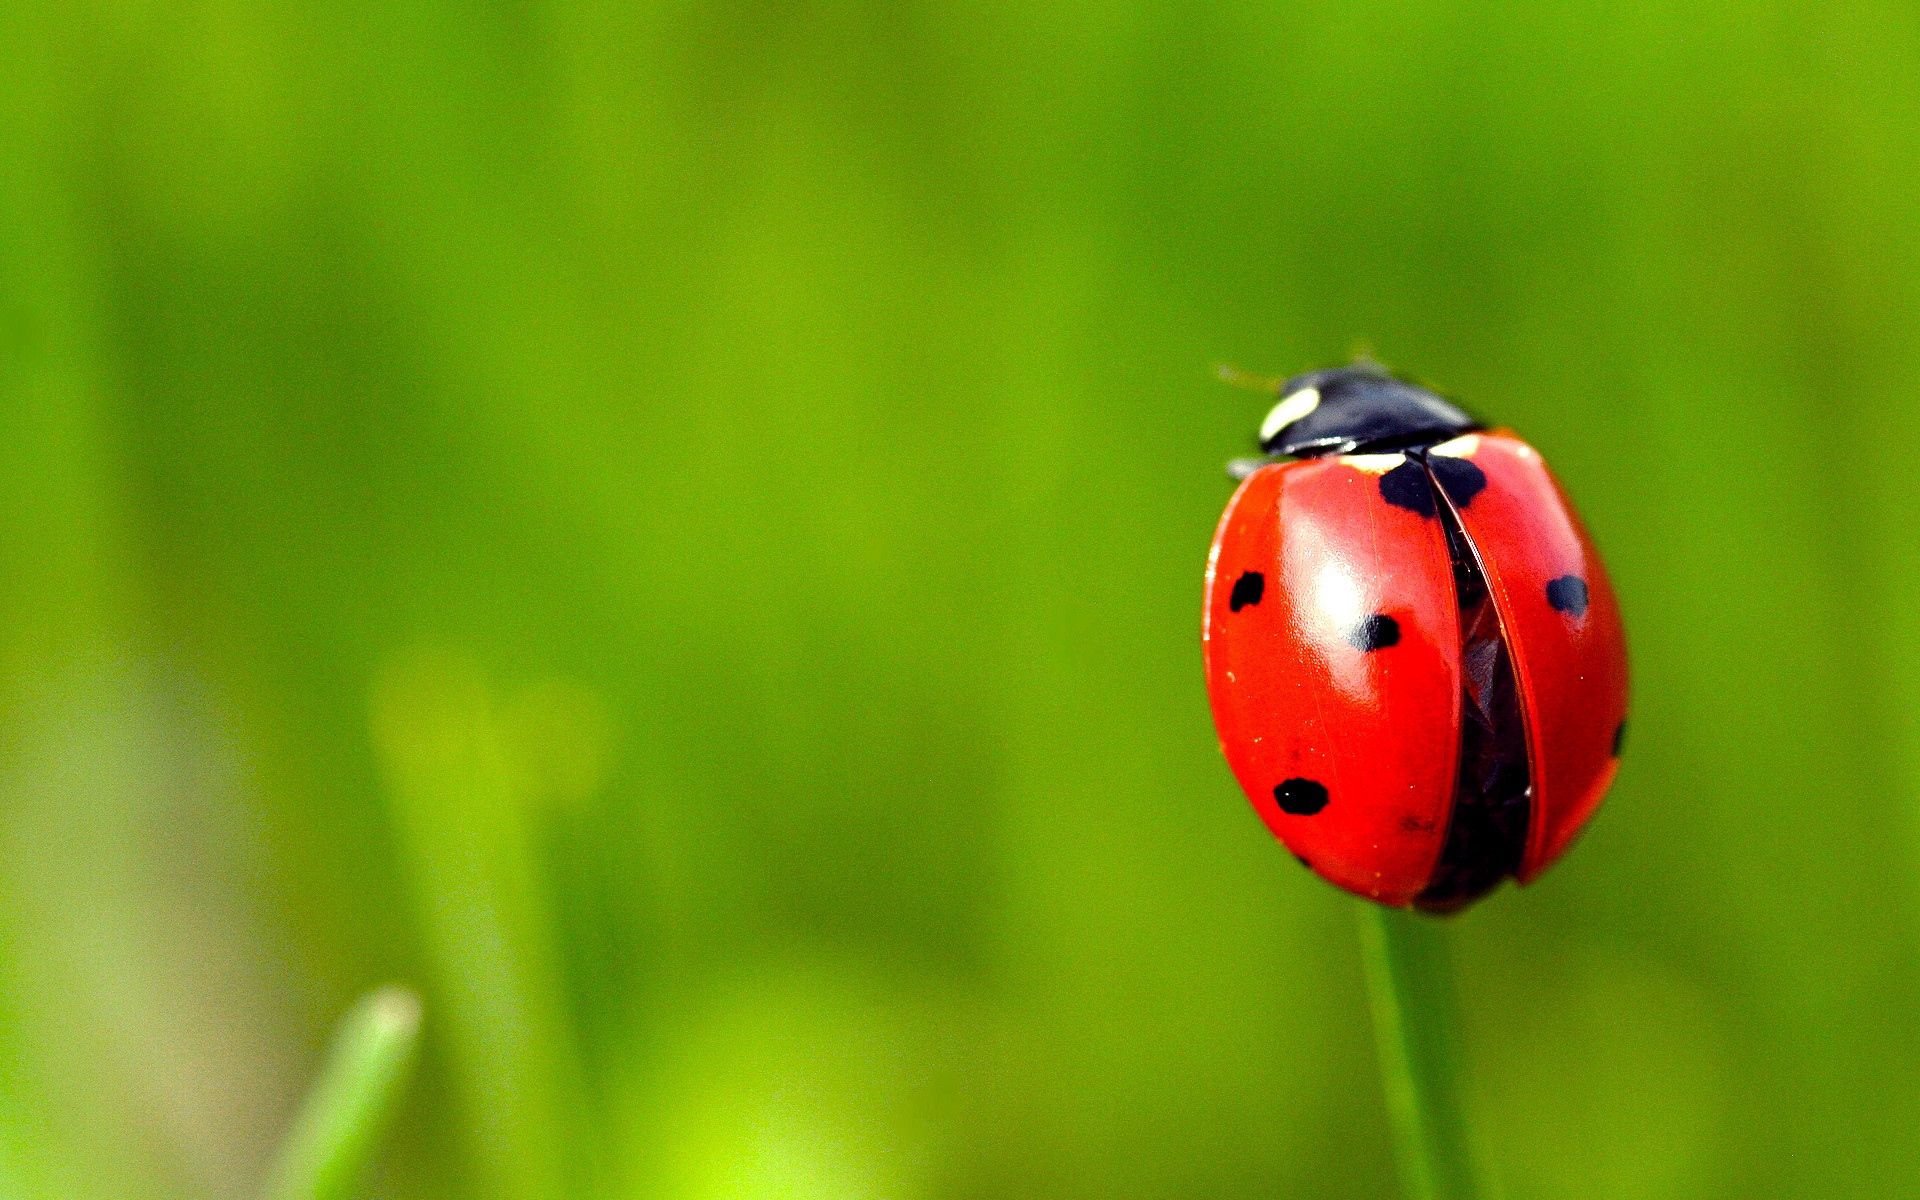 smooth, grass, red, macro, blur, stains, spots, ladybug, ladybird